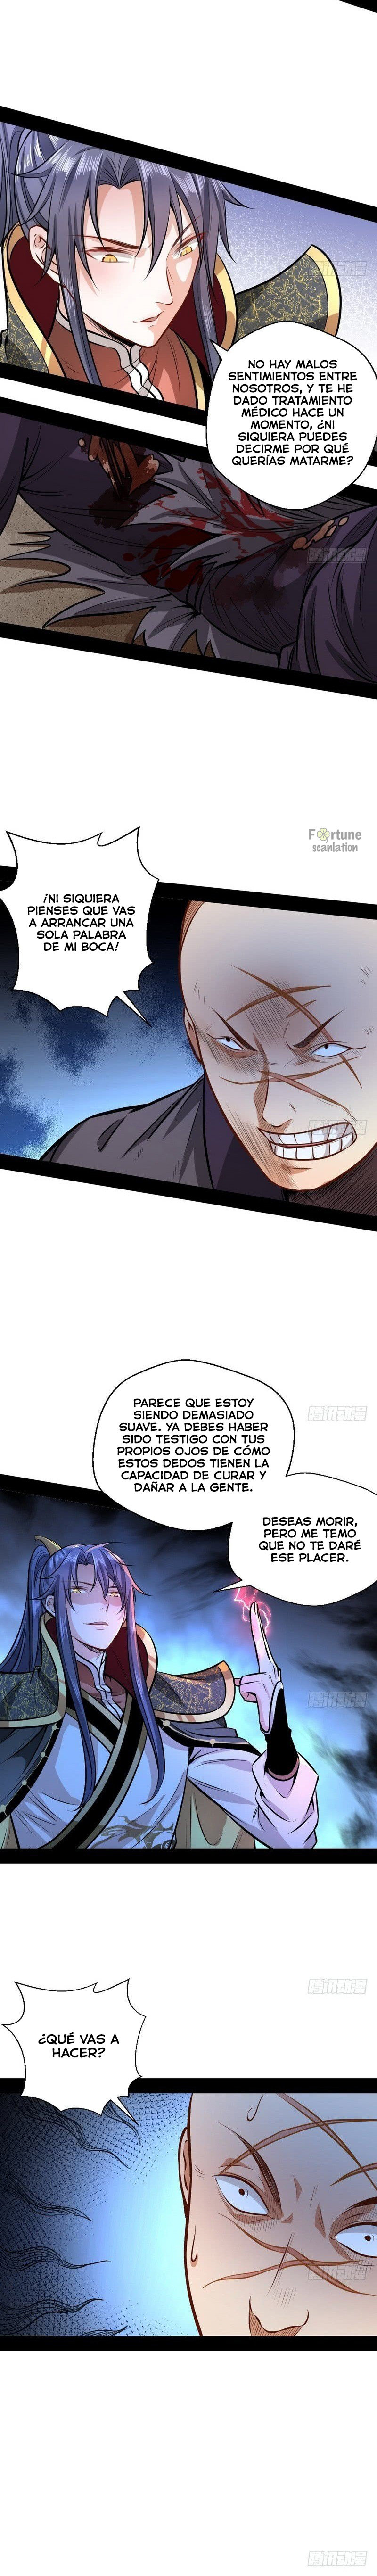 Manga Soy un dios maligno Chapter 32 image number 17